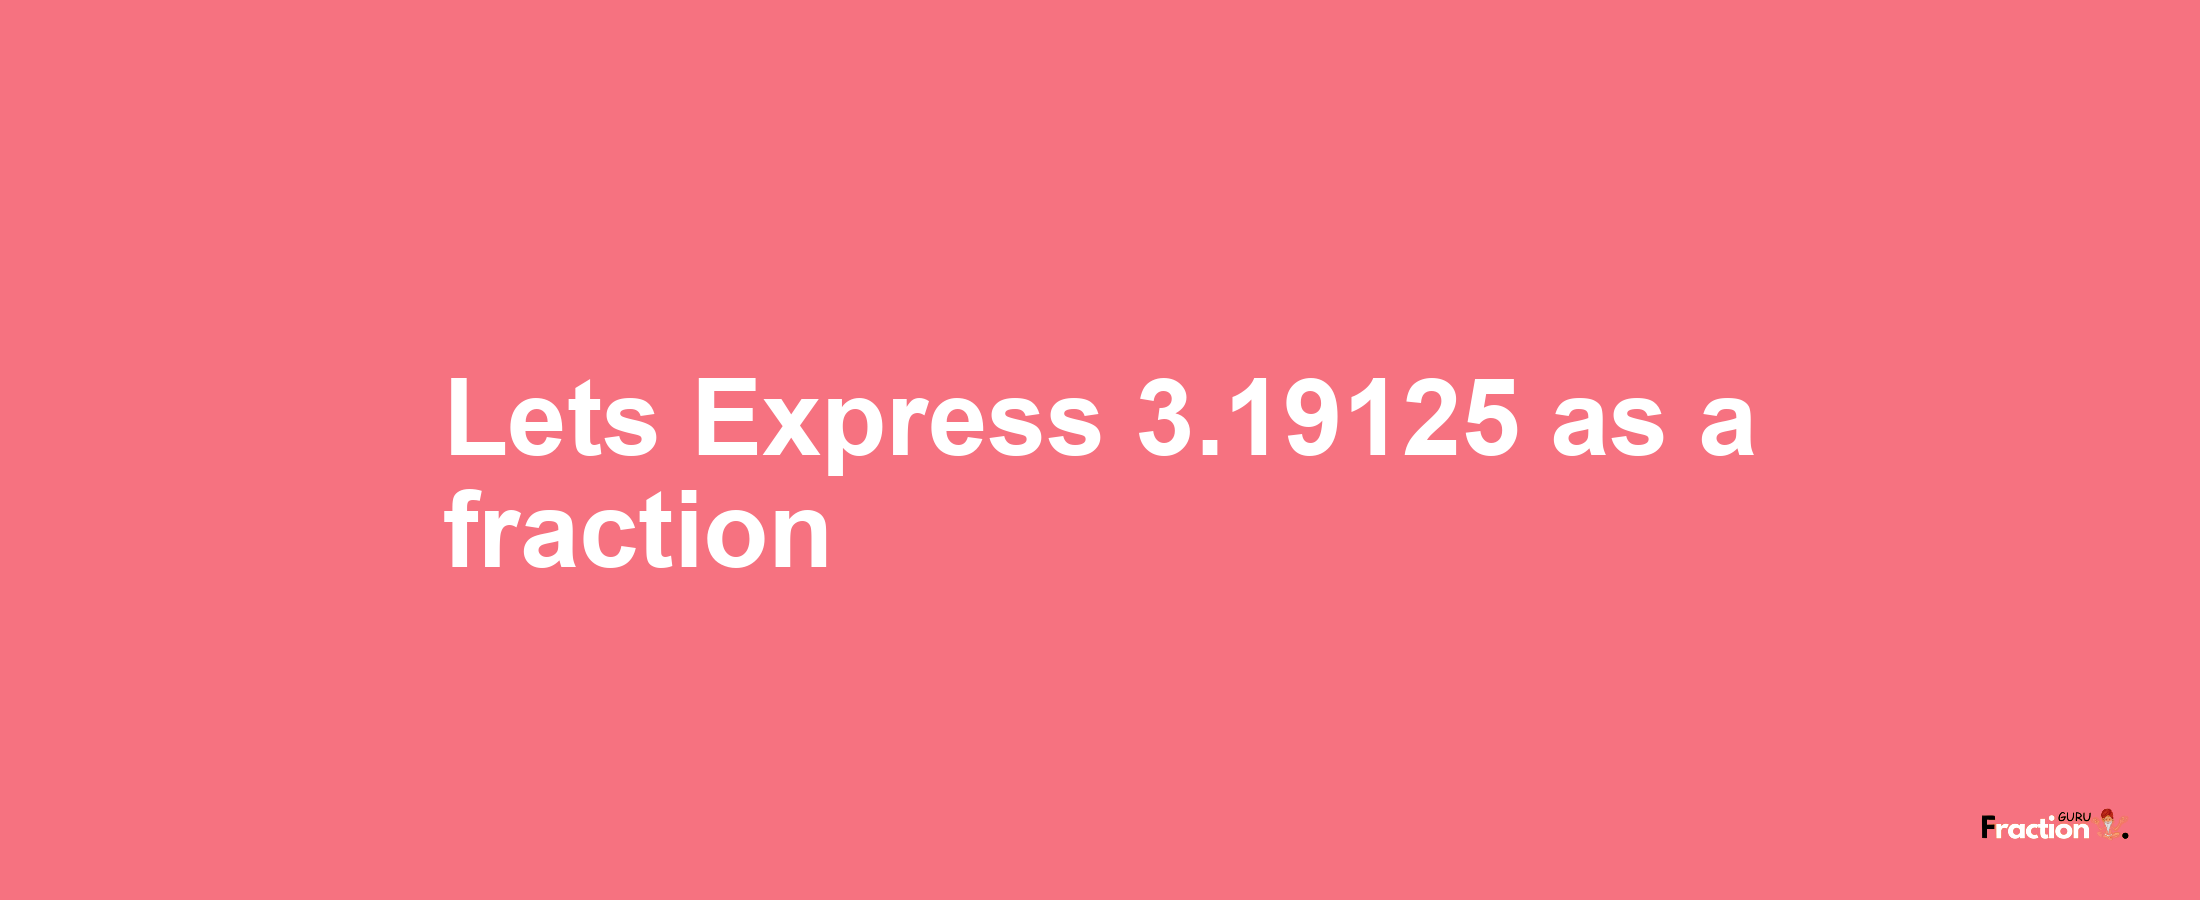 Lets Express 3.19125 as afraction